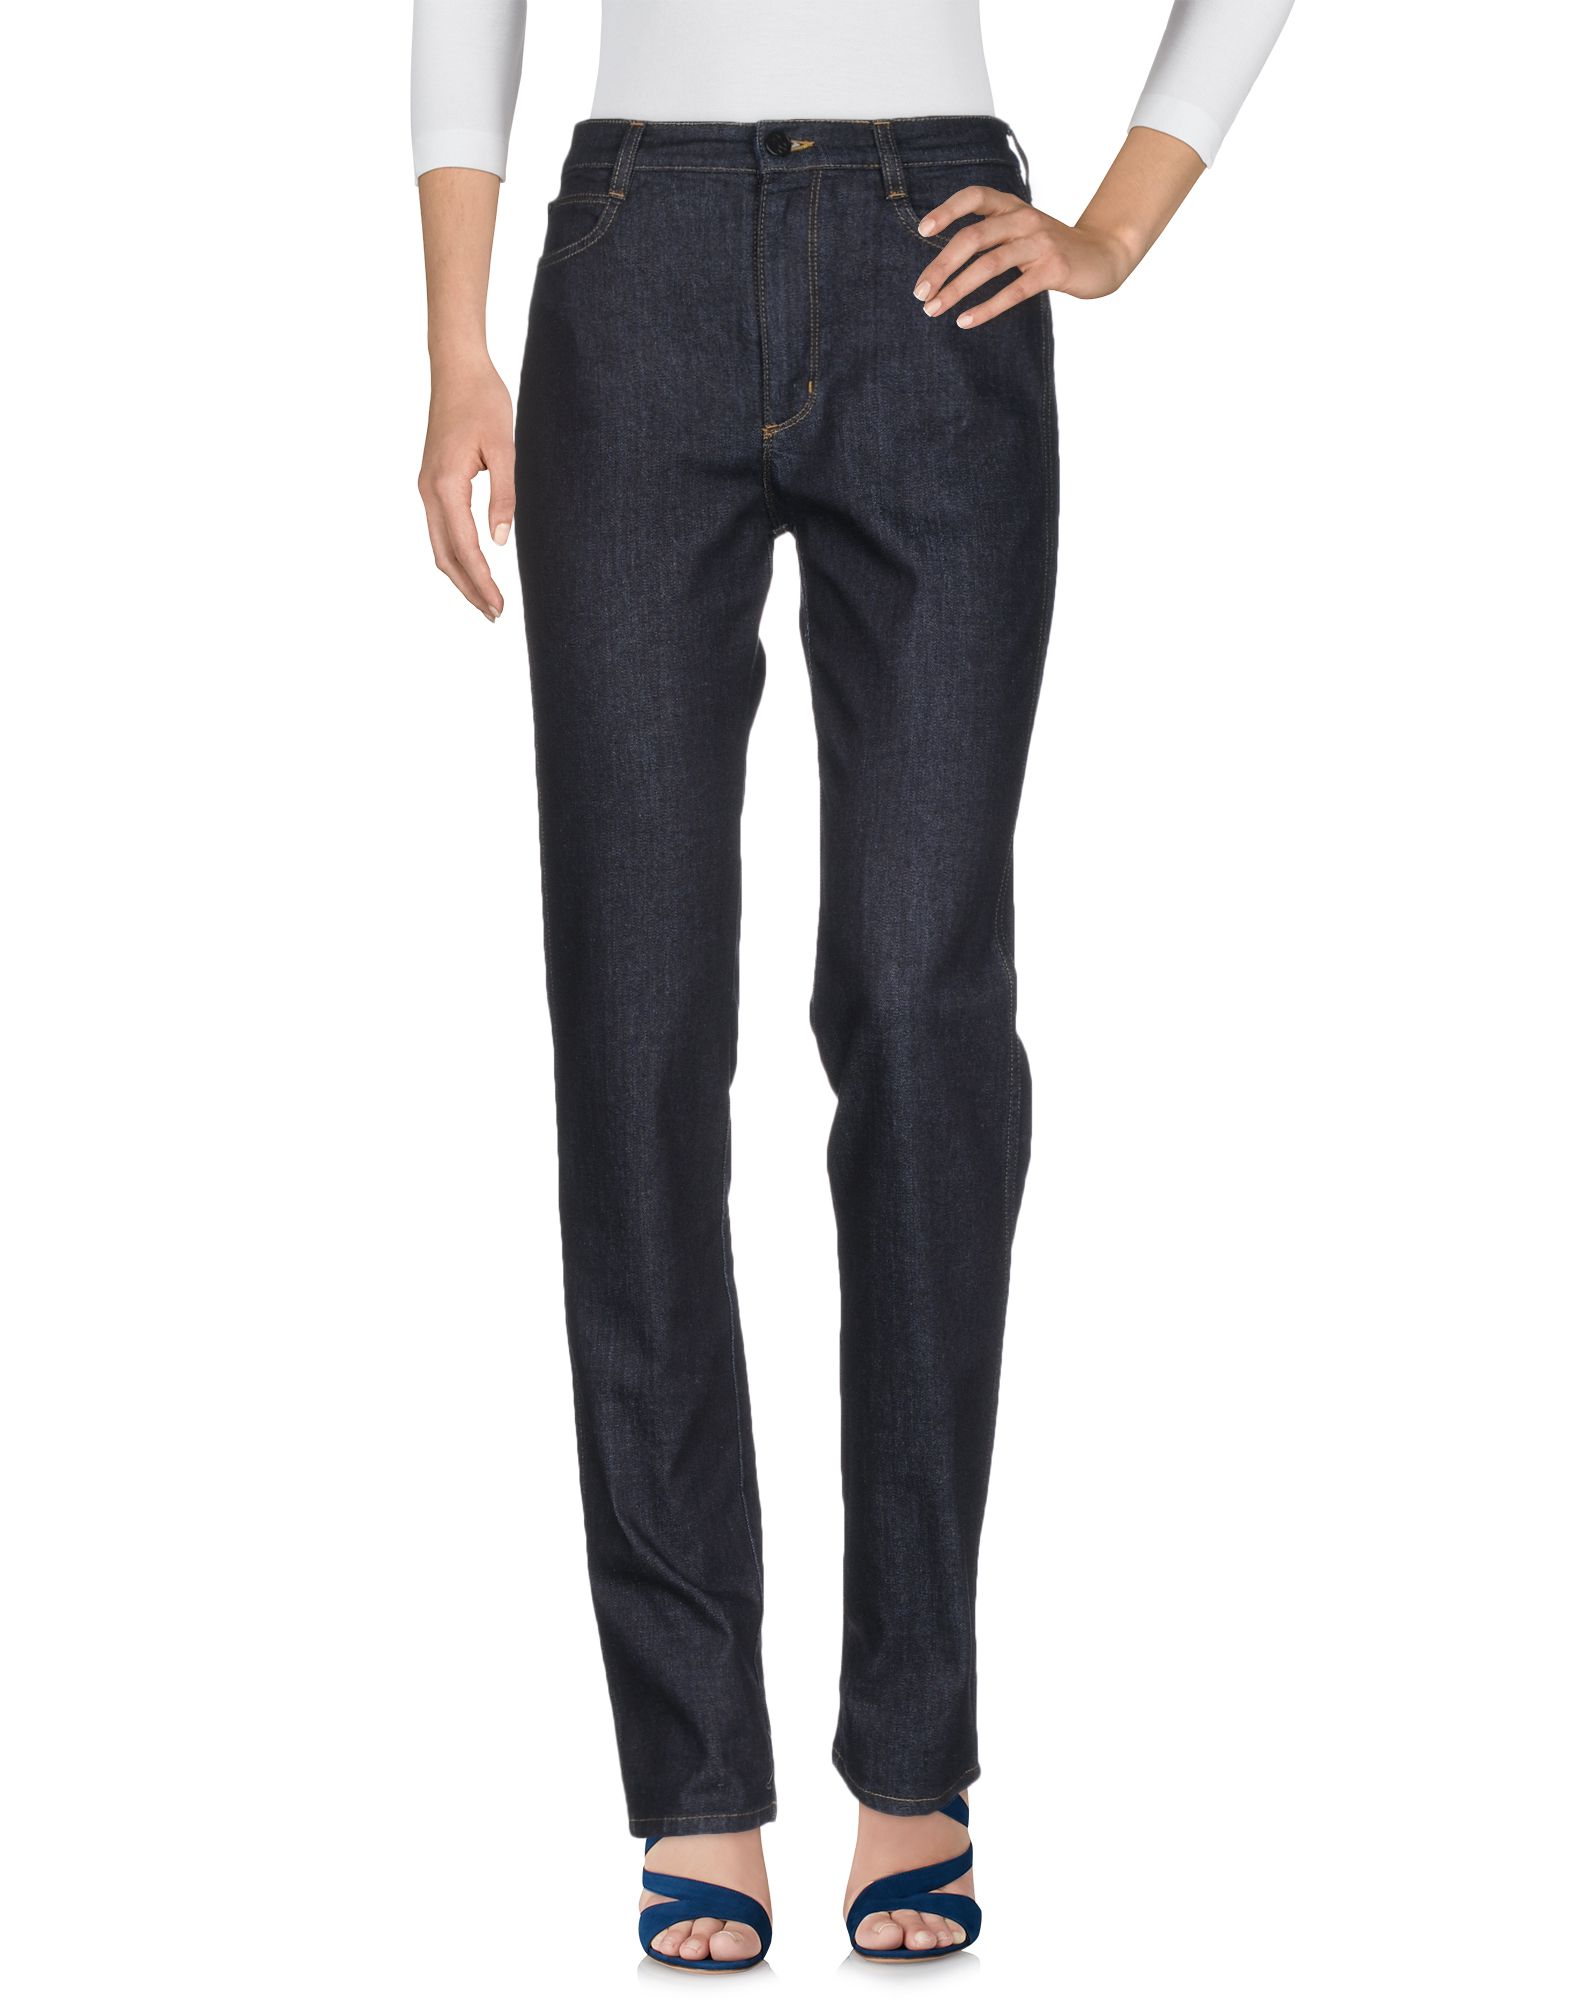 PS BY PAUL SMITH Denim pants,42665646PX 6